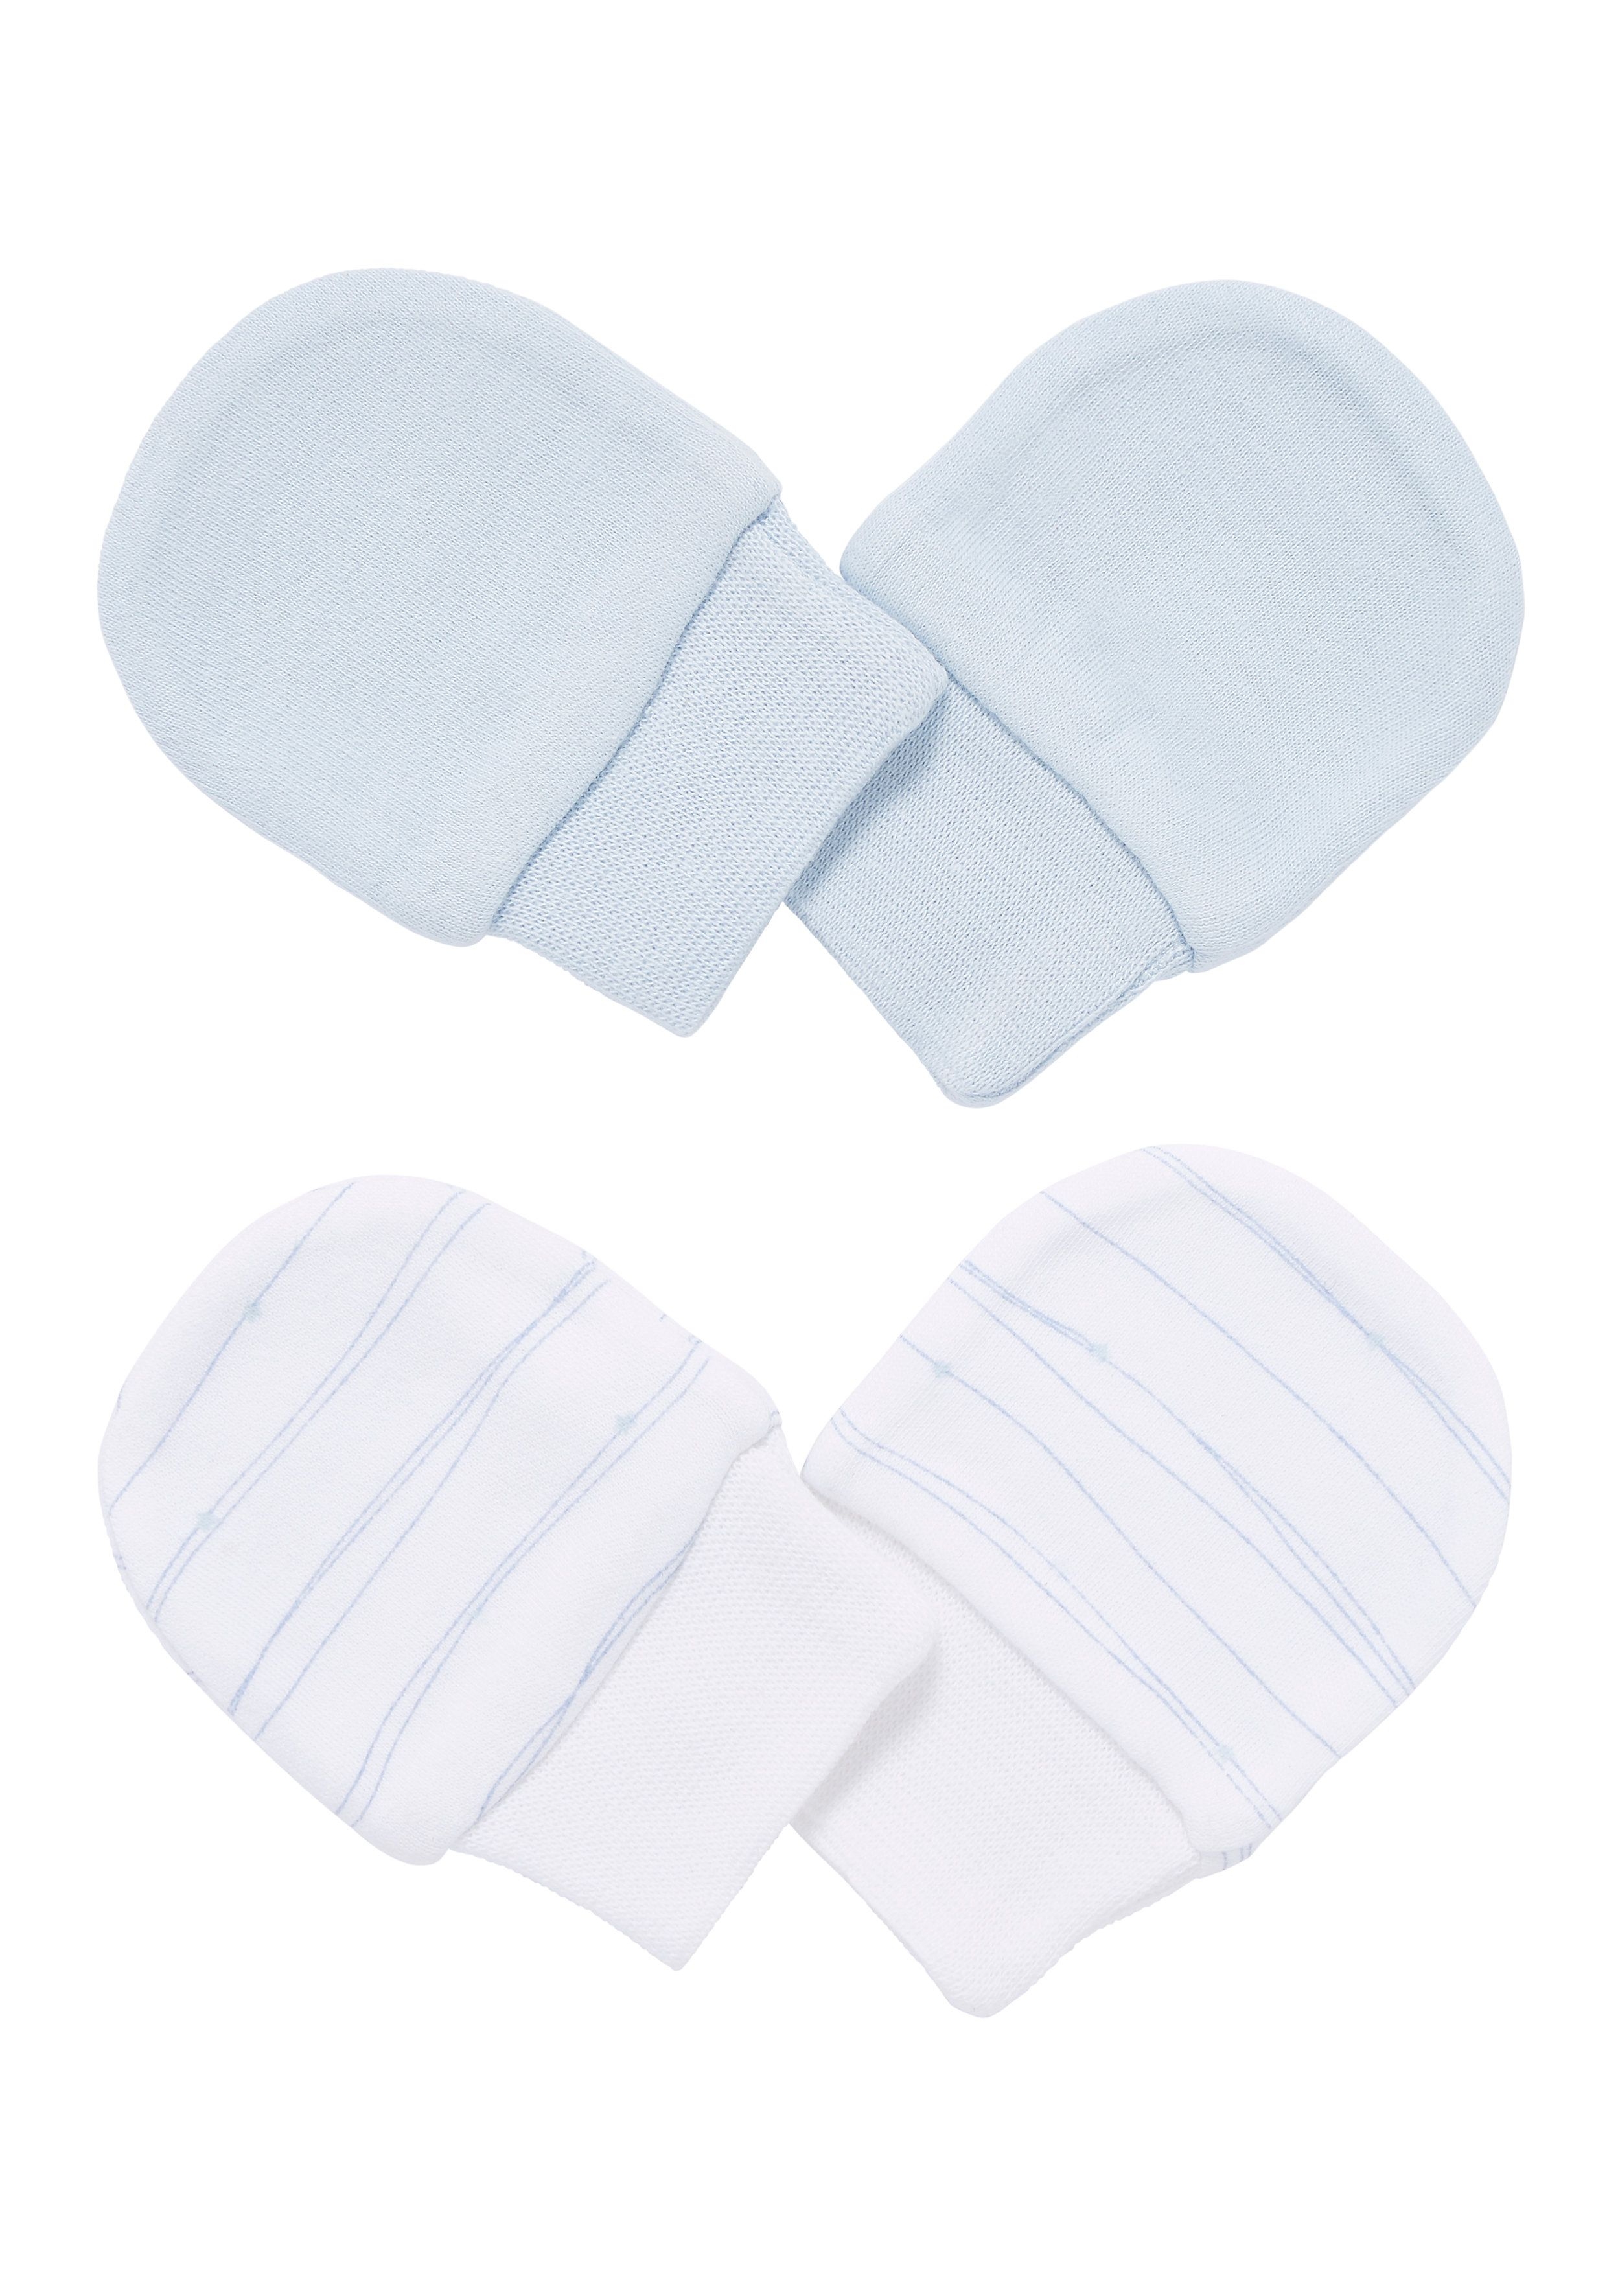 Mothercare | Boys My First Mitts - 2 Pack - Blue